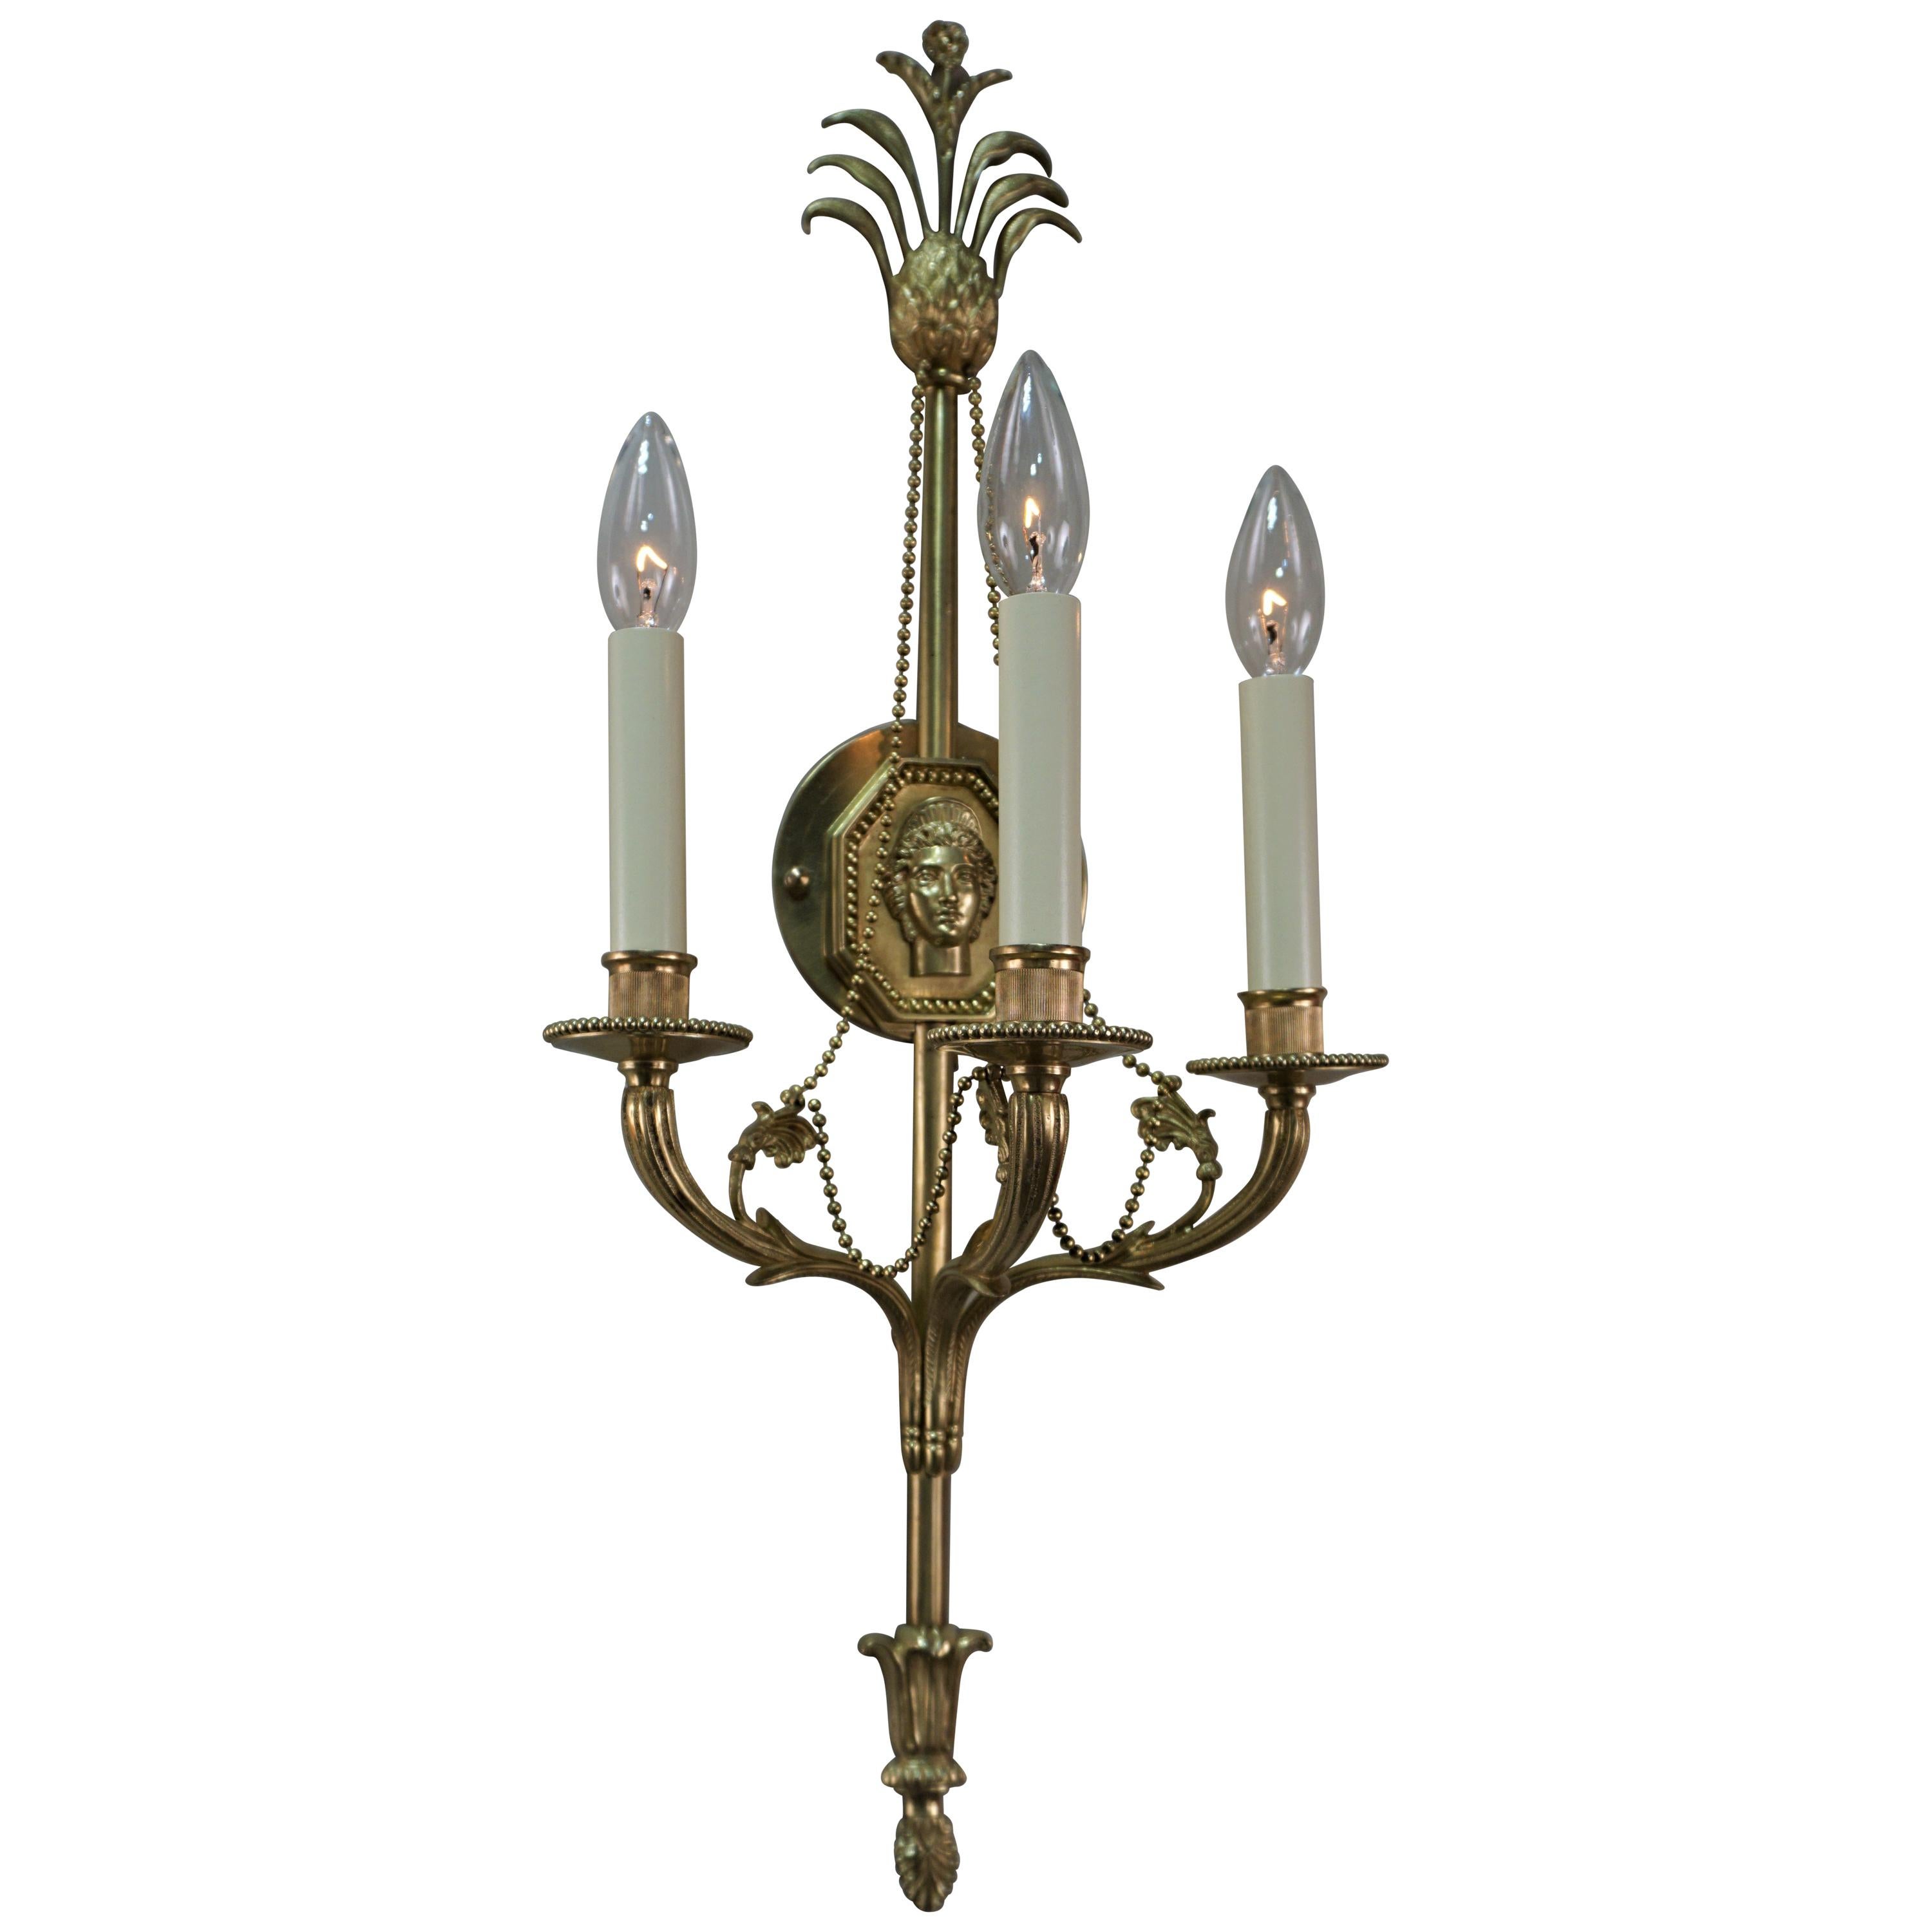 Pair of Classical Design Bronze Wall Sconces